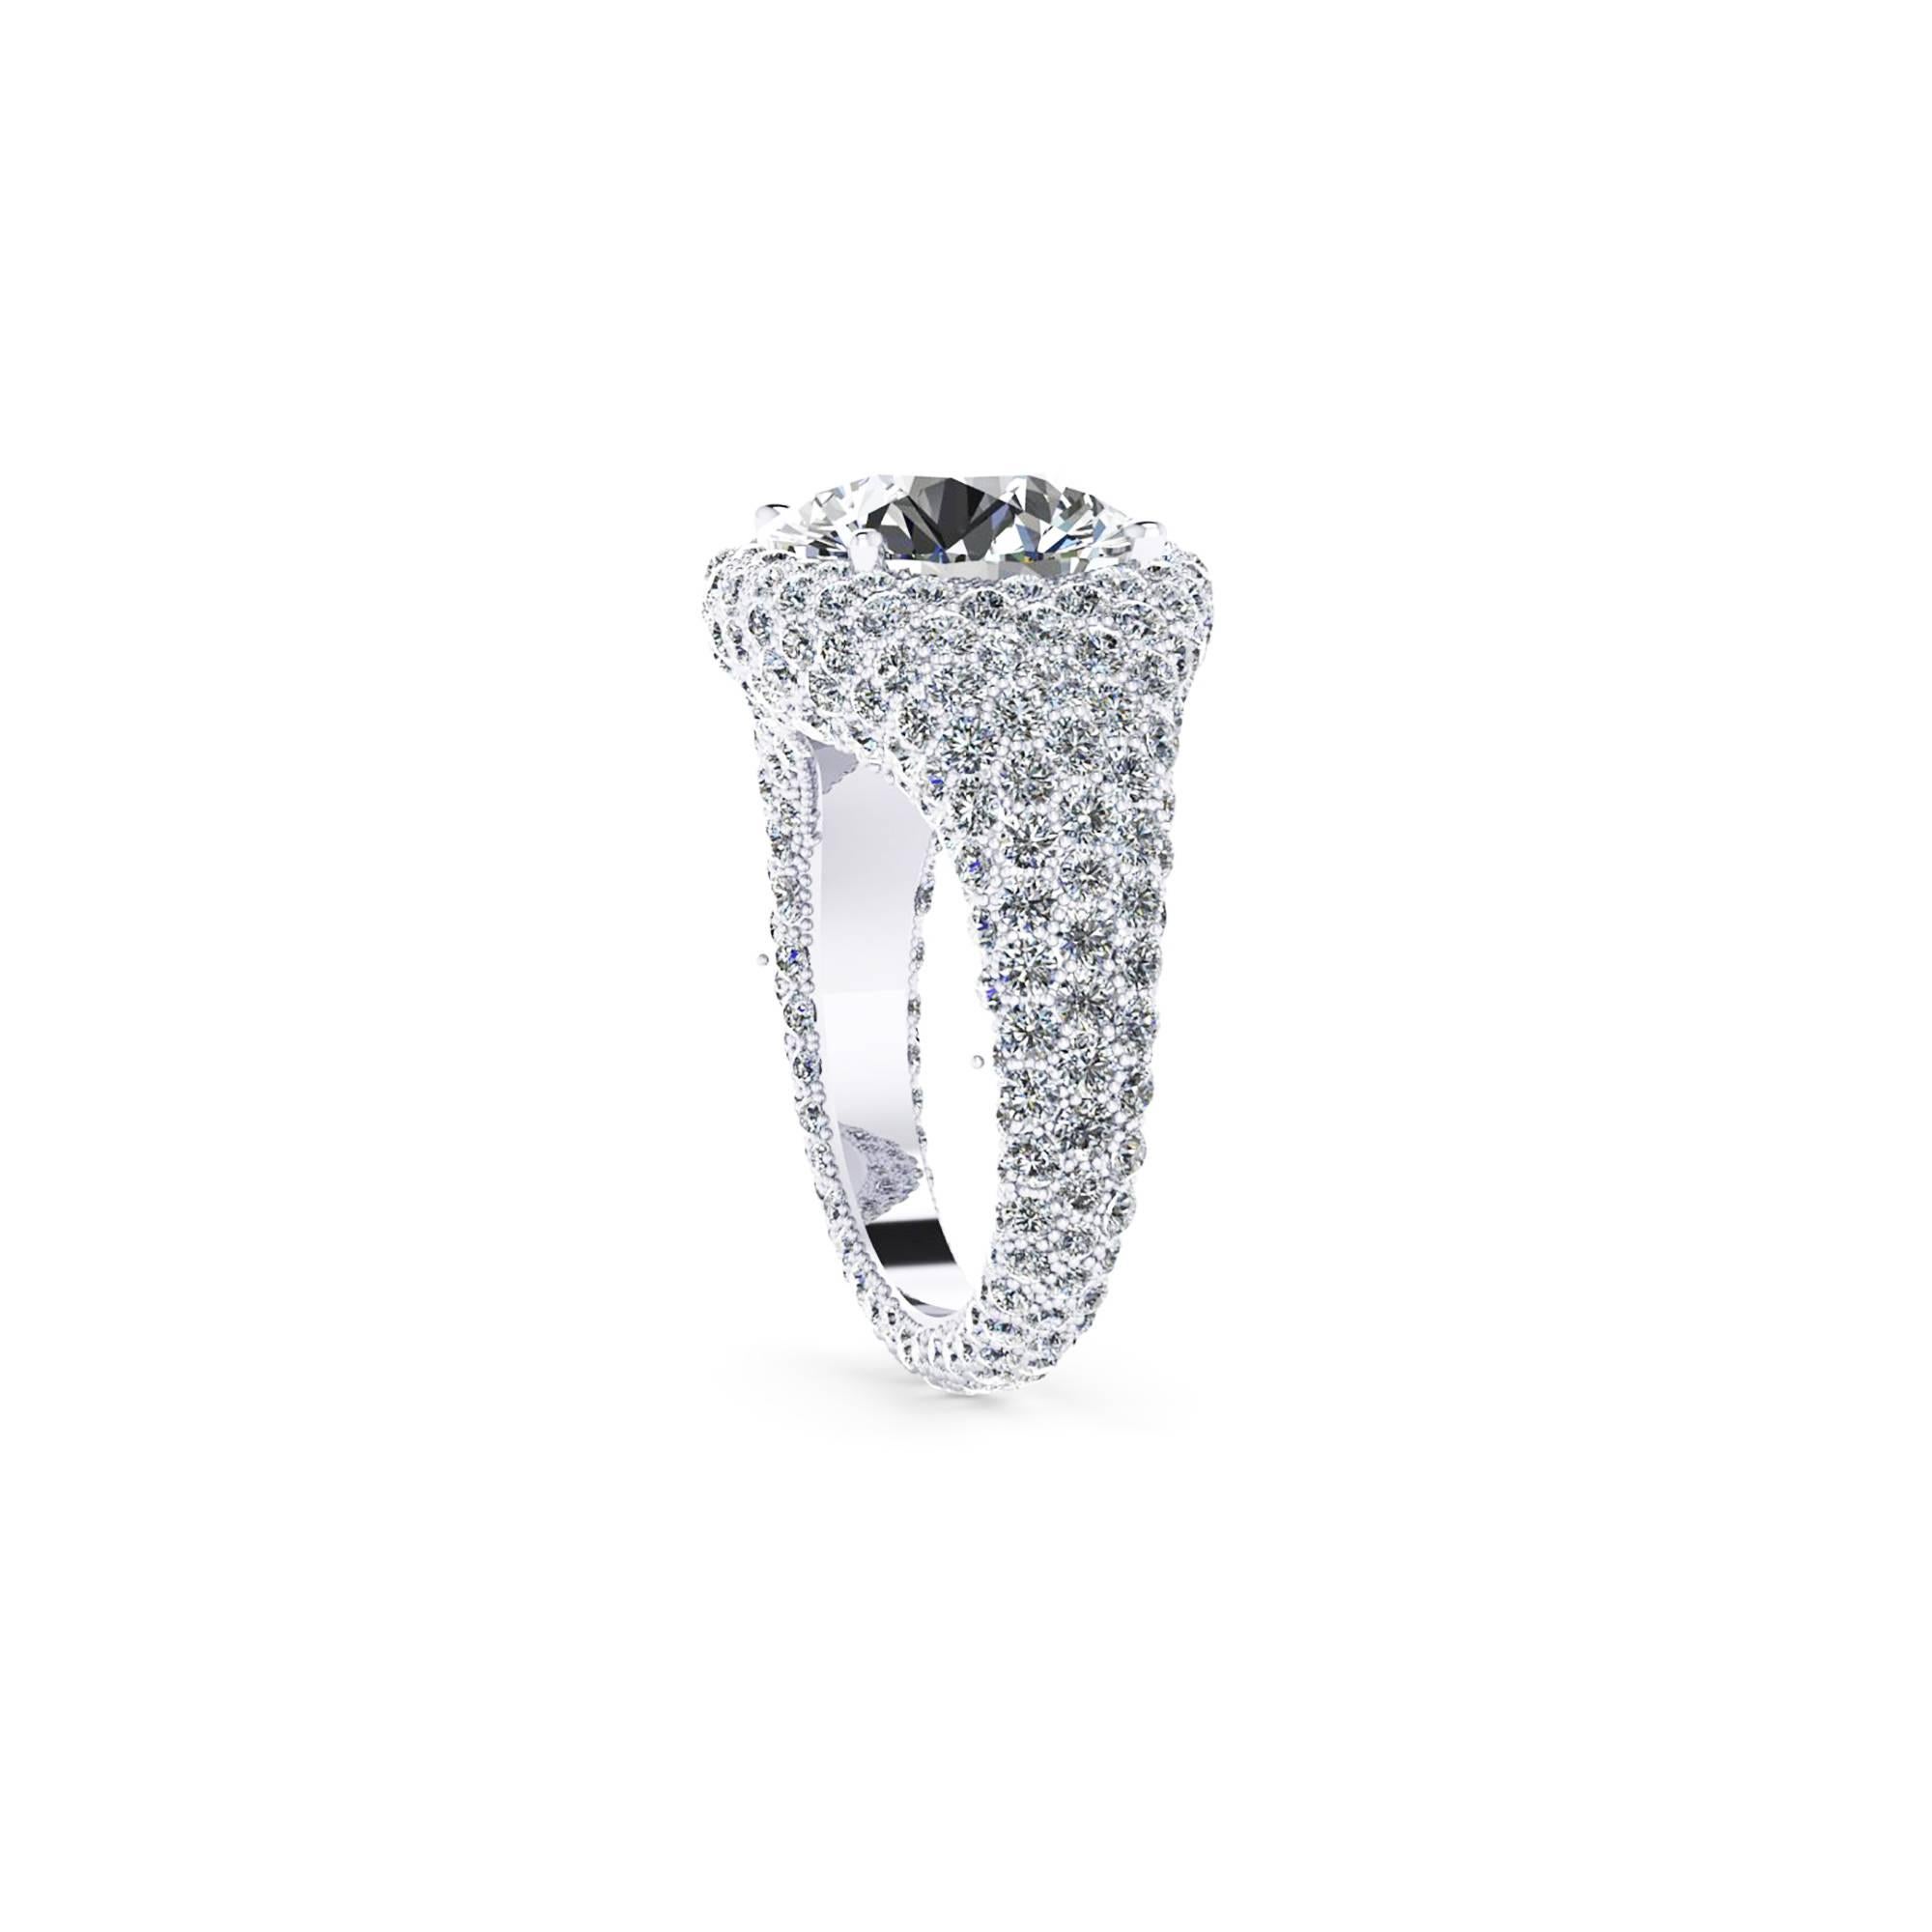 Ferrucci GIA Certfied 5.02 Carats, Round Cut, E Color VVS2 Clarity. 
Concieved by Ferrucci in New York City, hand crafted in his exclusive private Athelier in Manhattan, where the magic of jewelery happens. This gorgeous diamond ring is completely